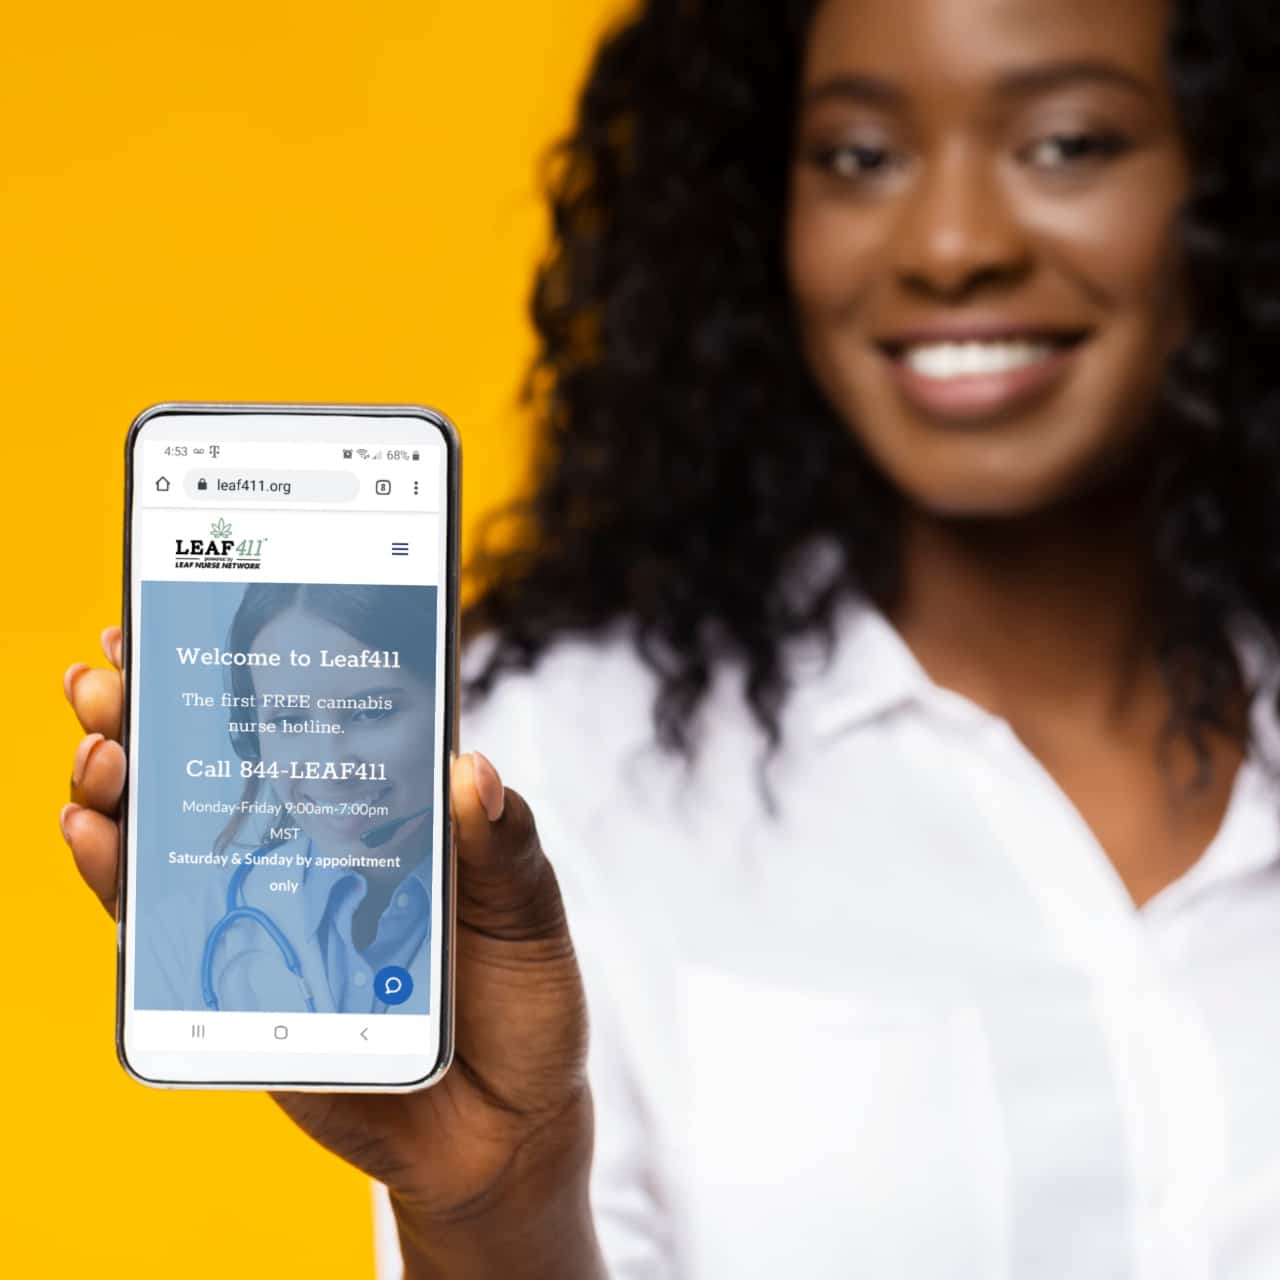 Black woman in white shirt smiling and holding out a smartphone with the Leaf411 website showing on the screen.